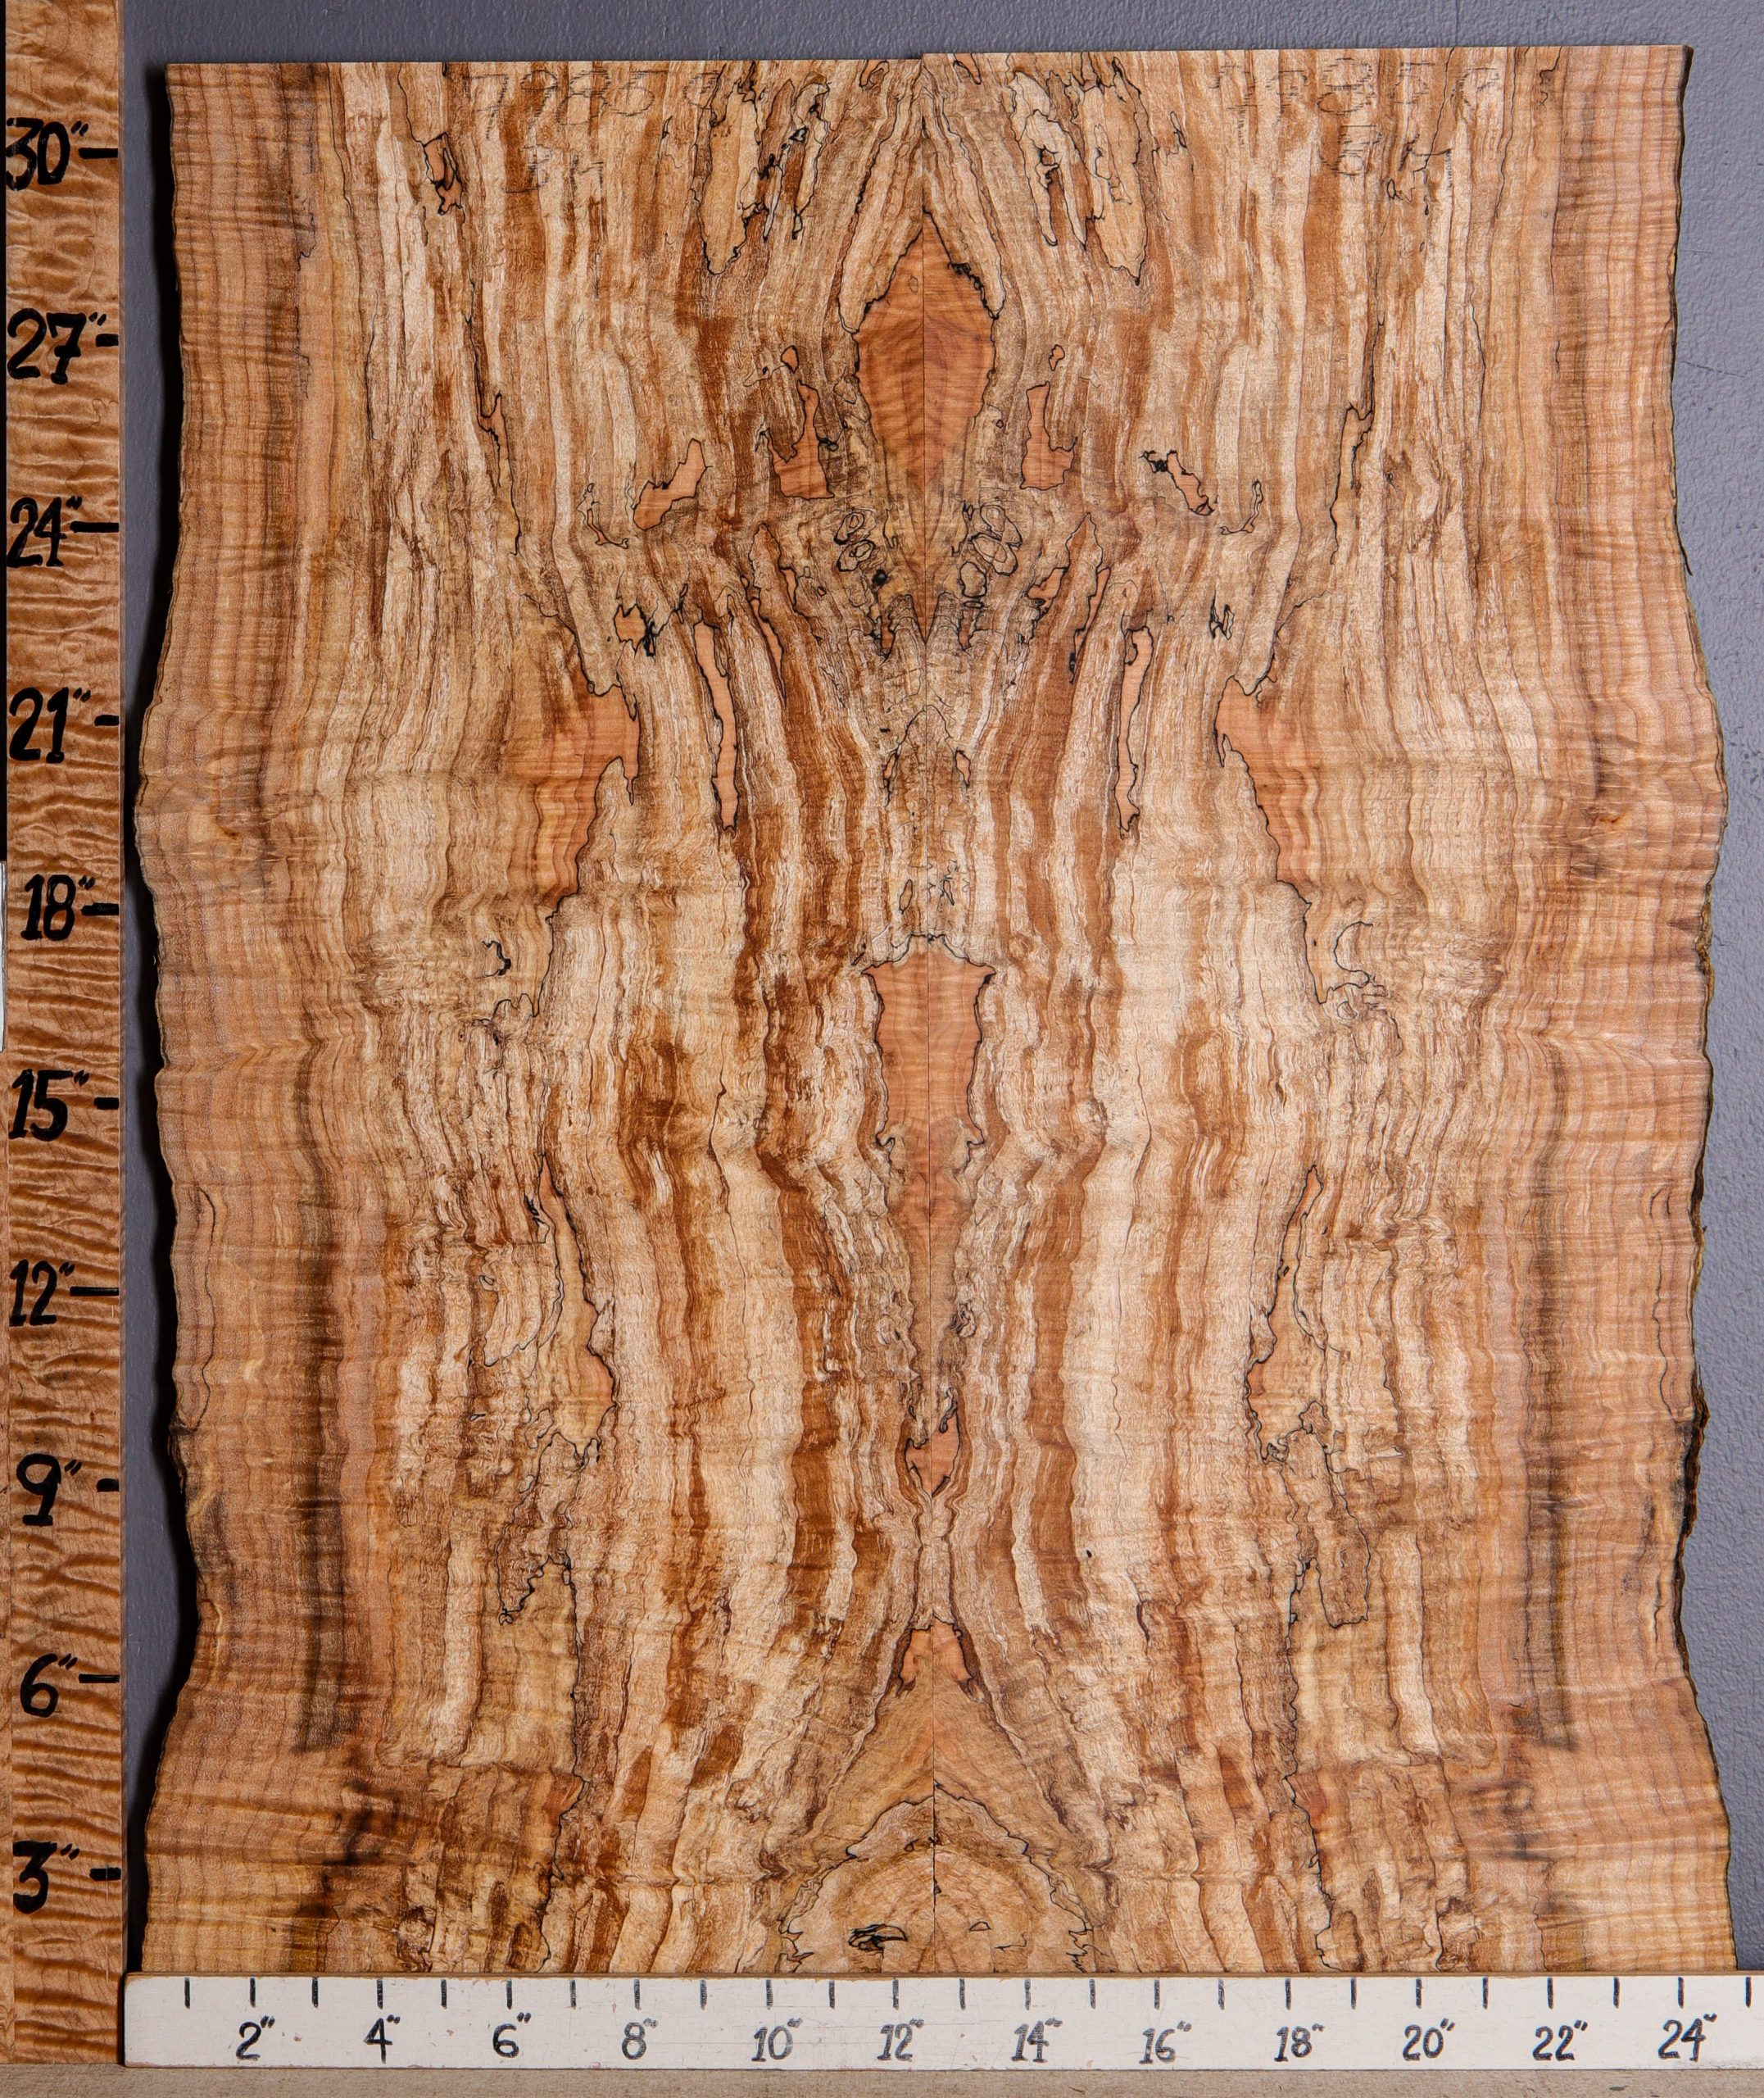 5A Spalted Curly Maple Microlumber Bookmatch with Live Edge 23 X